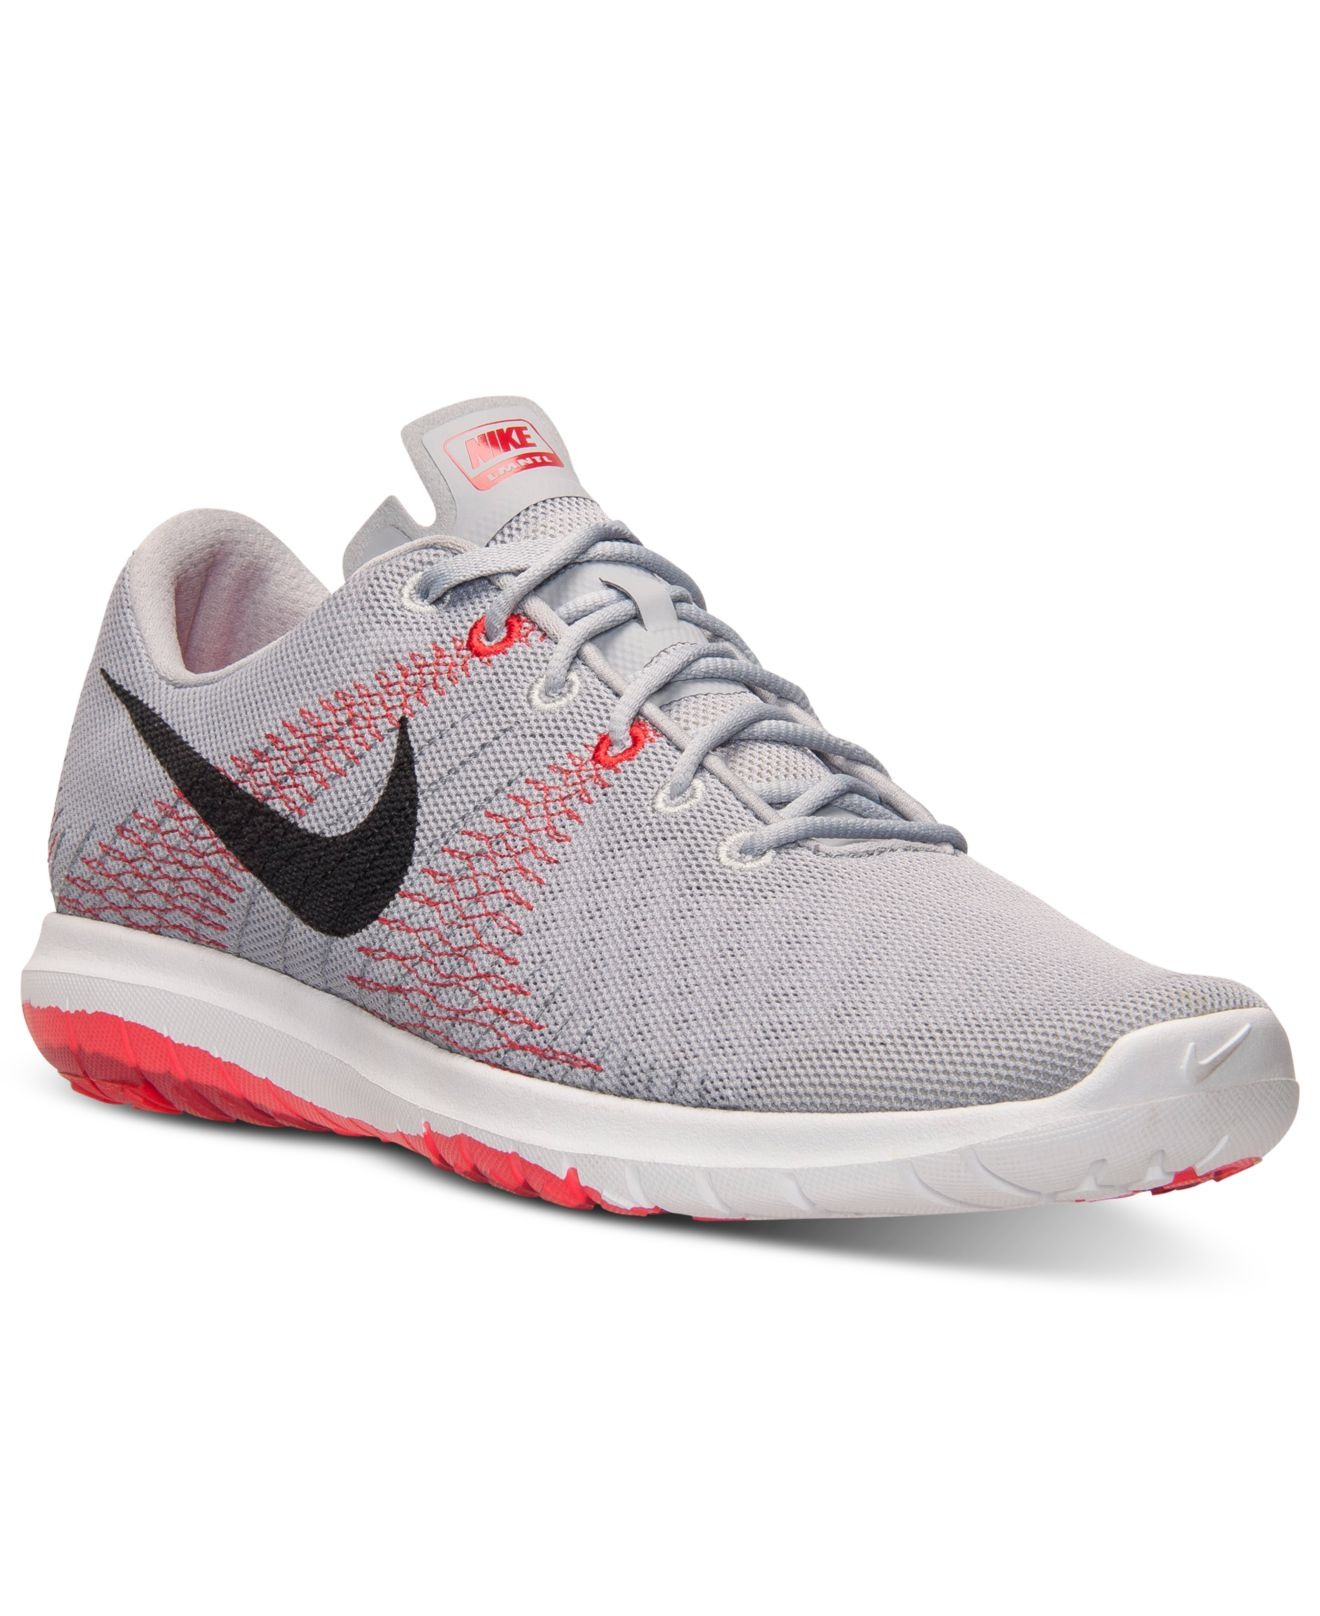 Lyst - Nike Men's Flex Fury Running Sneakers From Finish Line in Gray ...